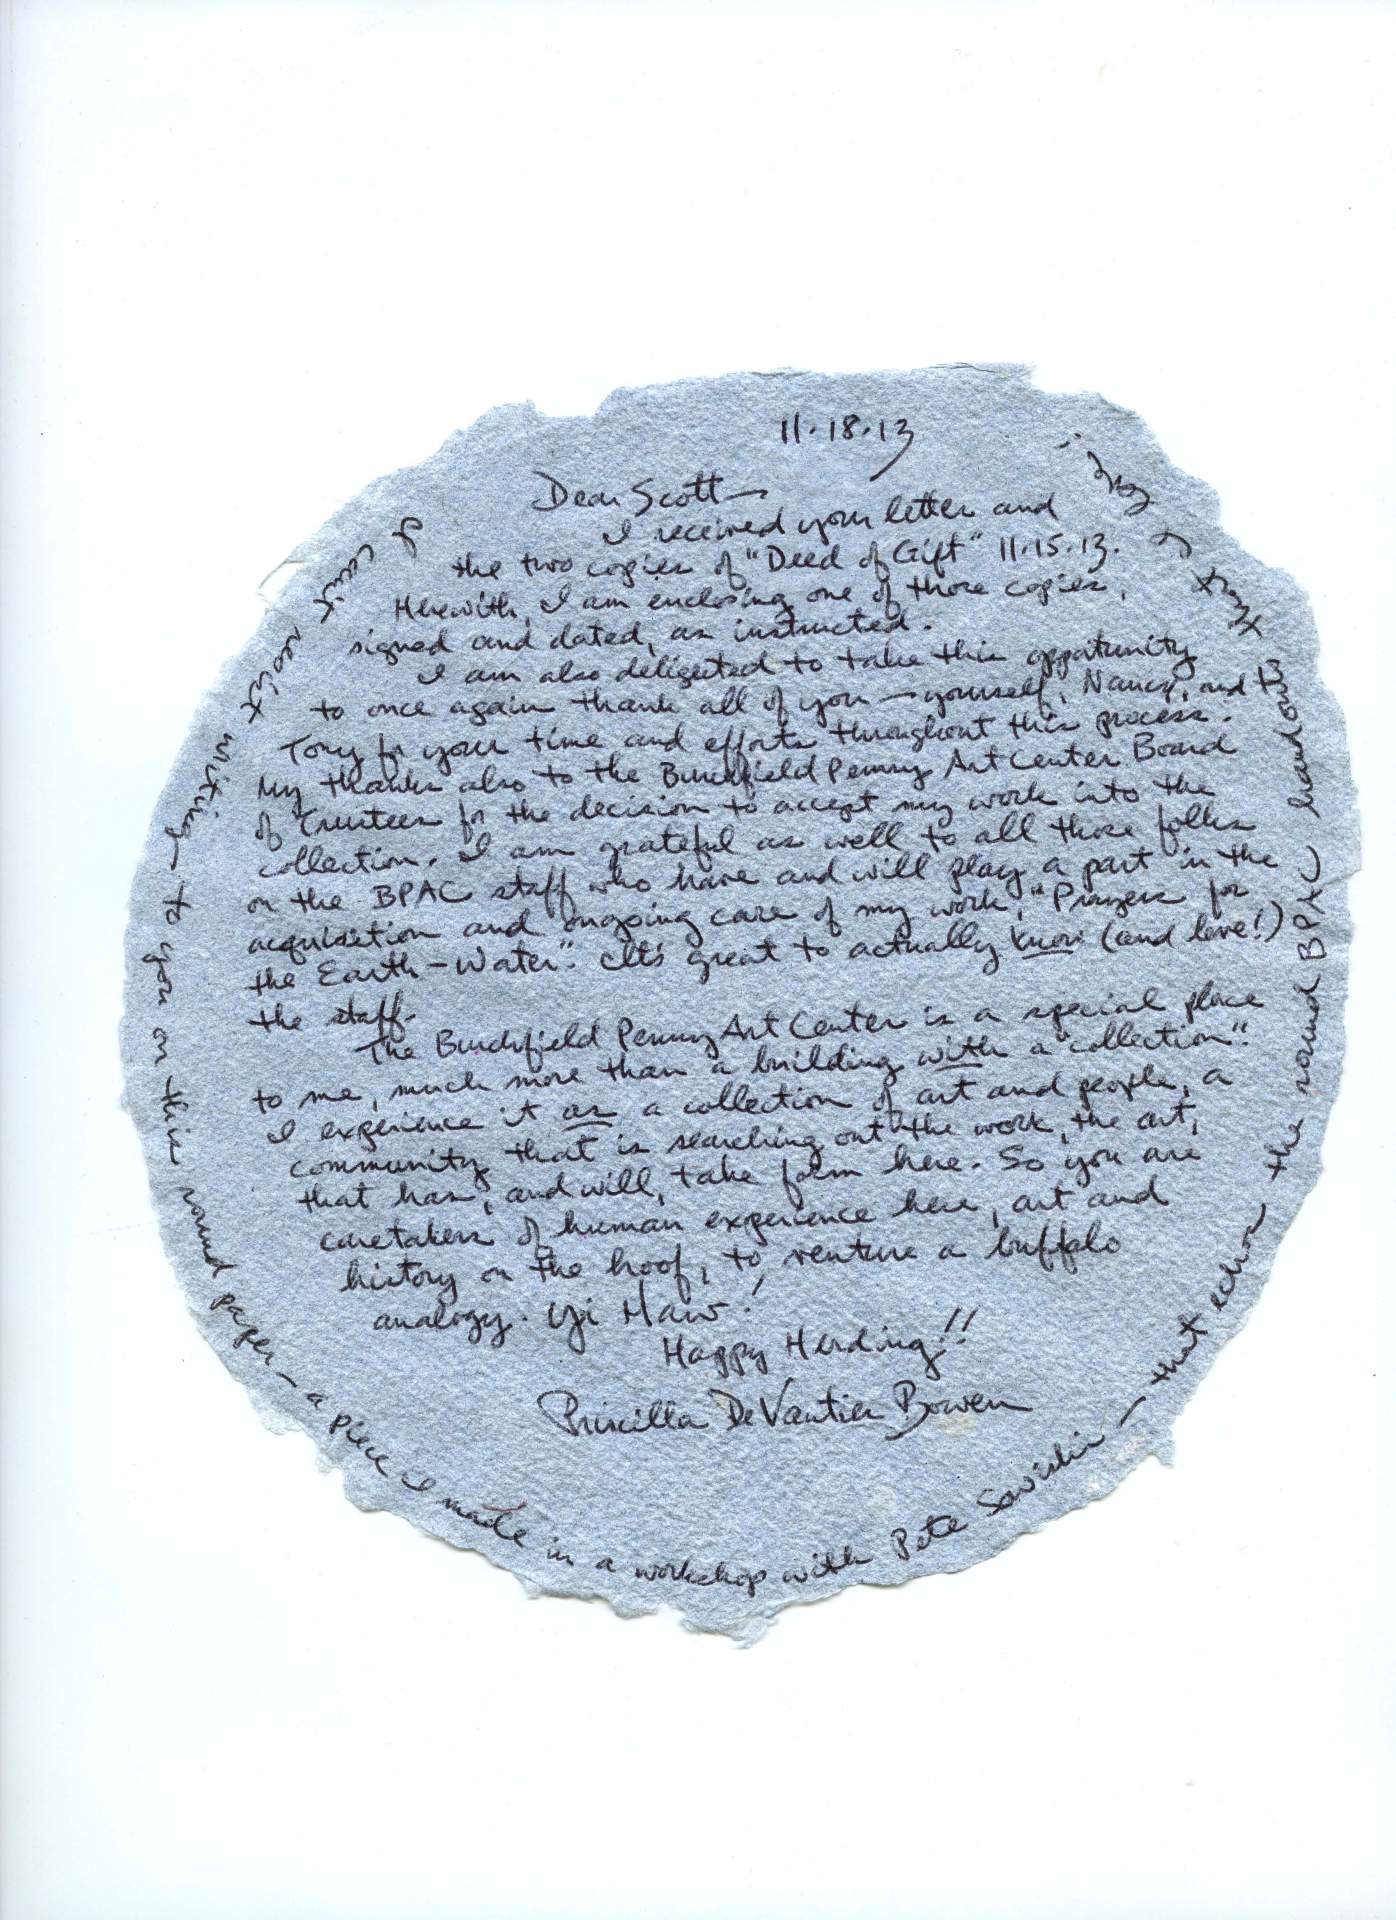 [Letter from Priscilla Bowen to Scott Propeack at the Burchfield Penney on paper she made]